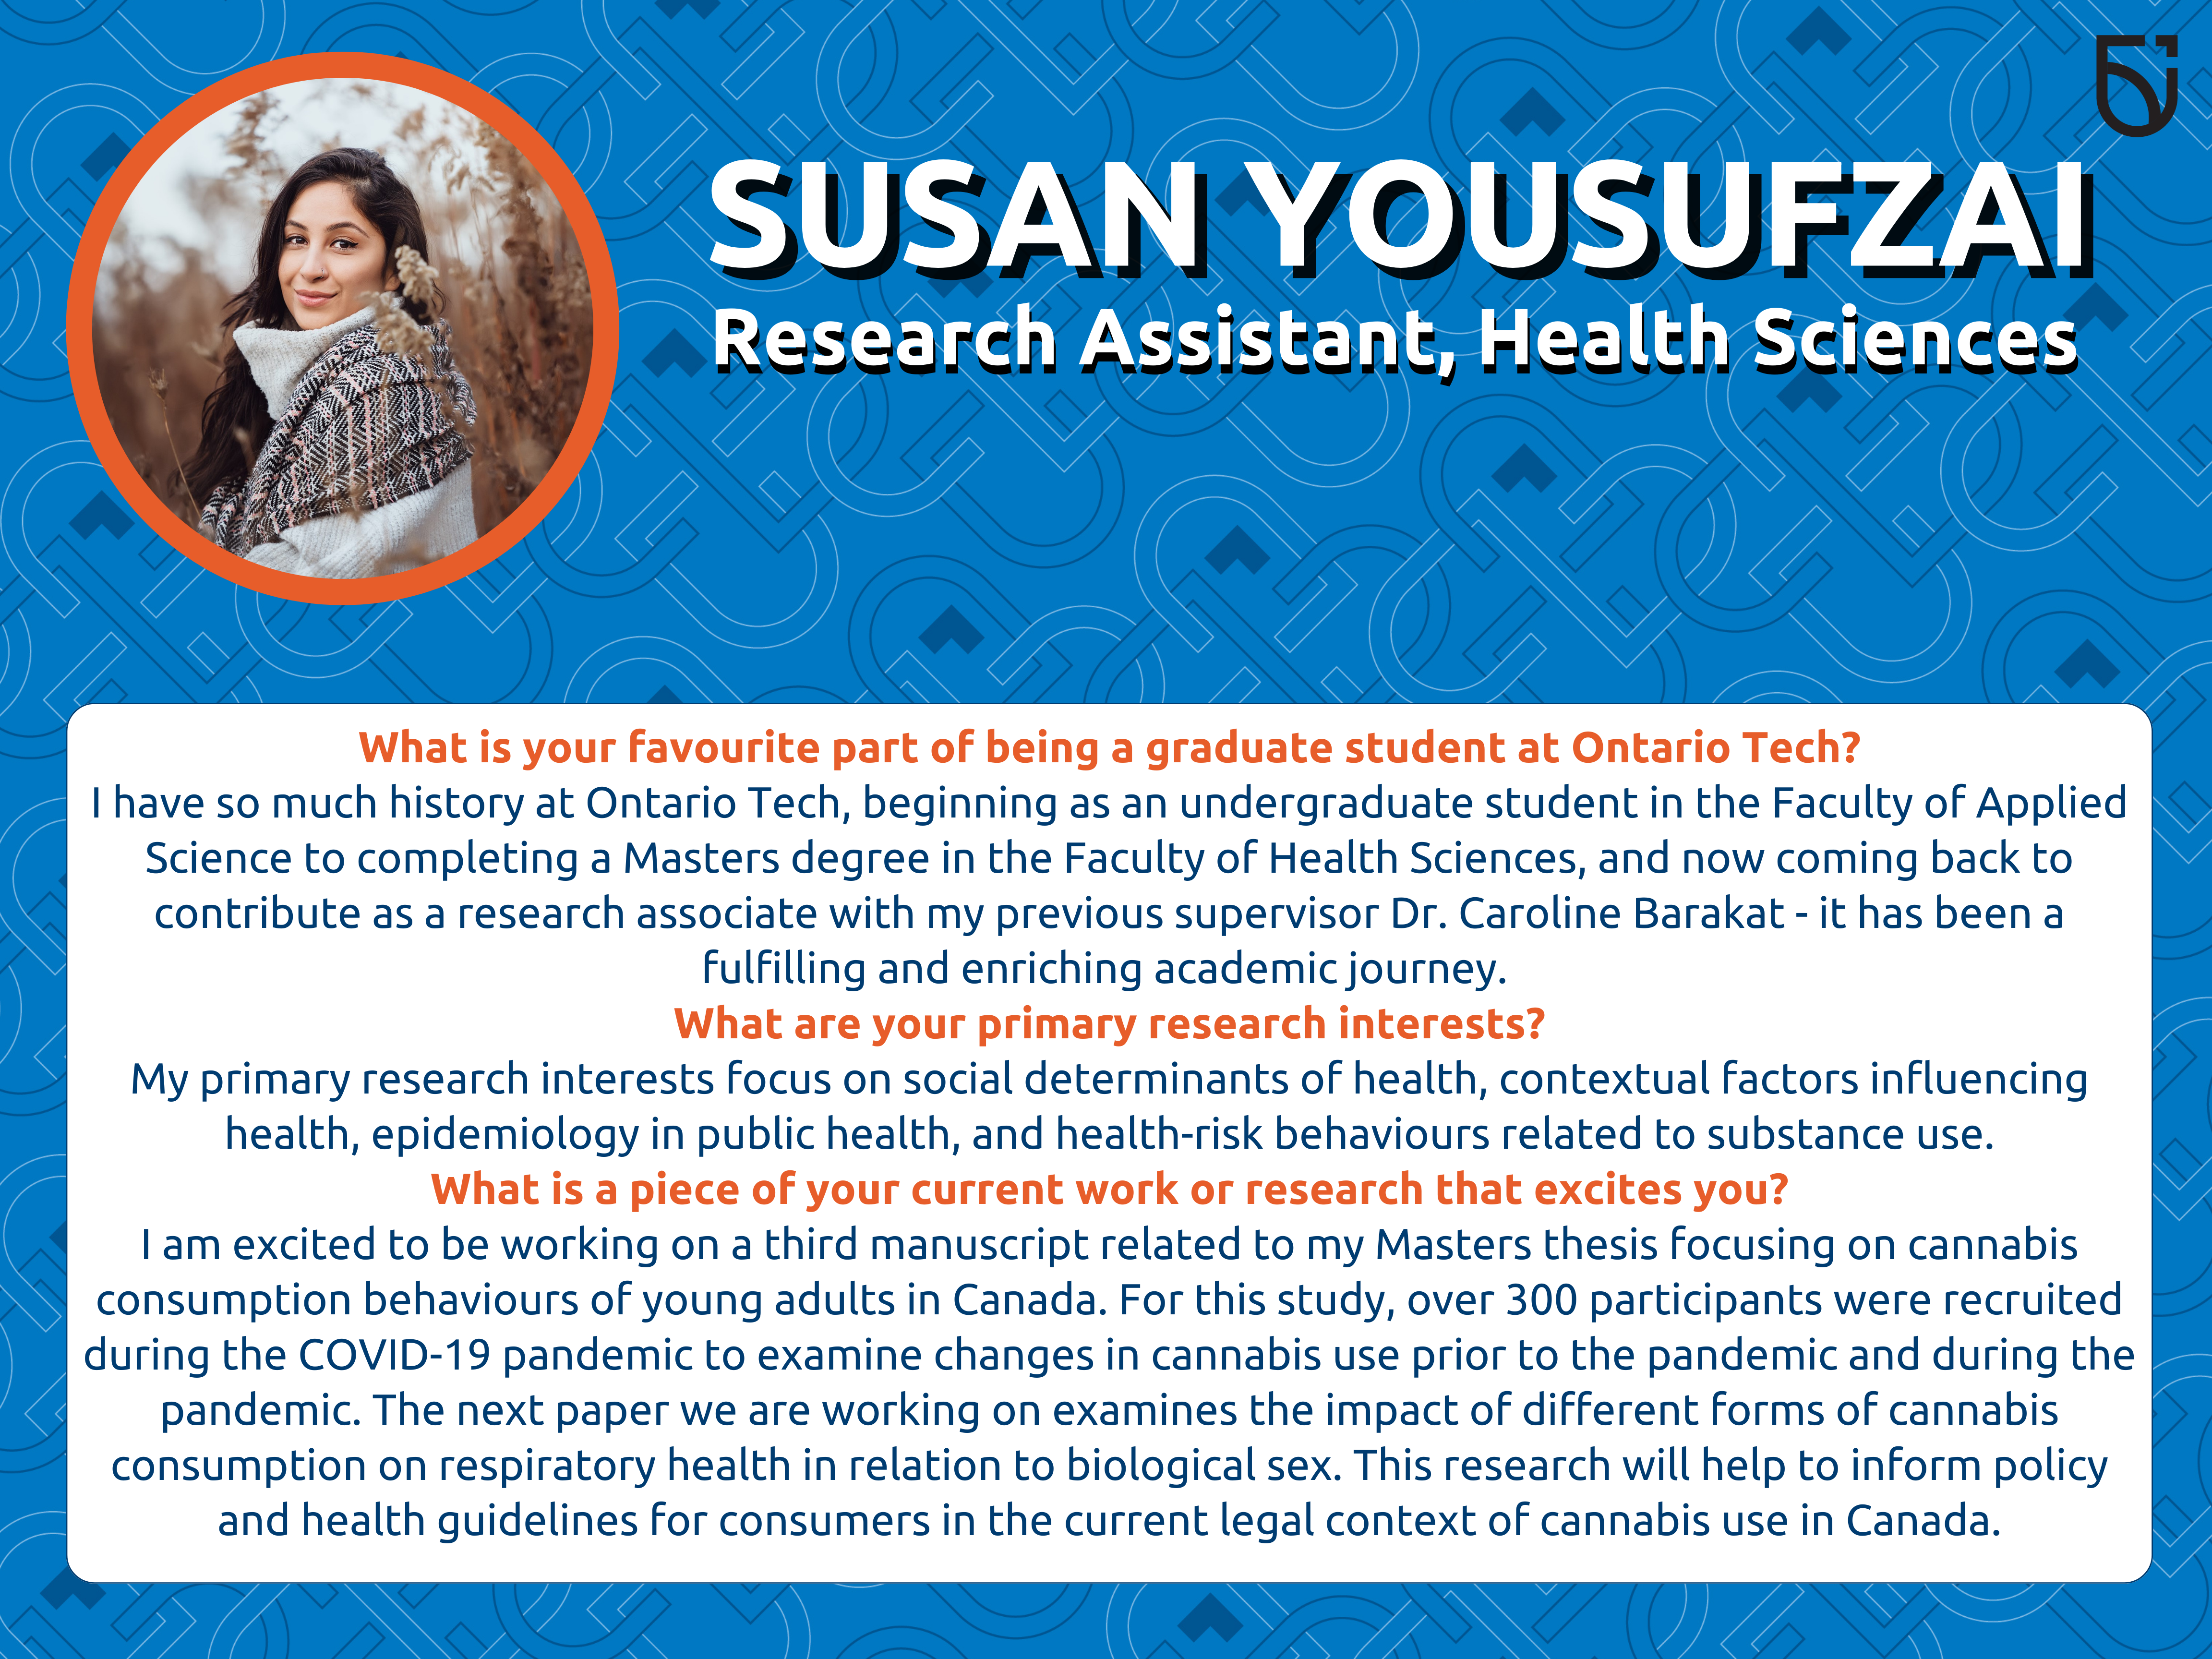 This photo is a Women’s Wednesday feature of Susan Yousufzai, a Research Assistant in the Faculty of Health Sciences